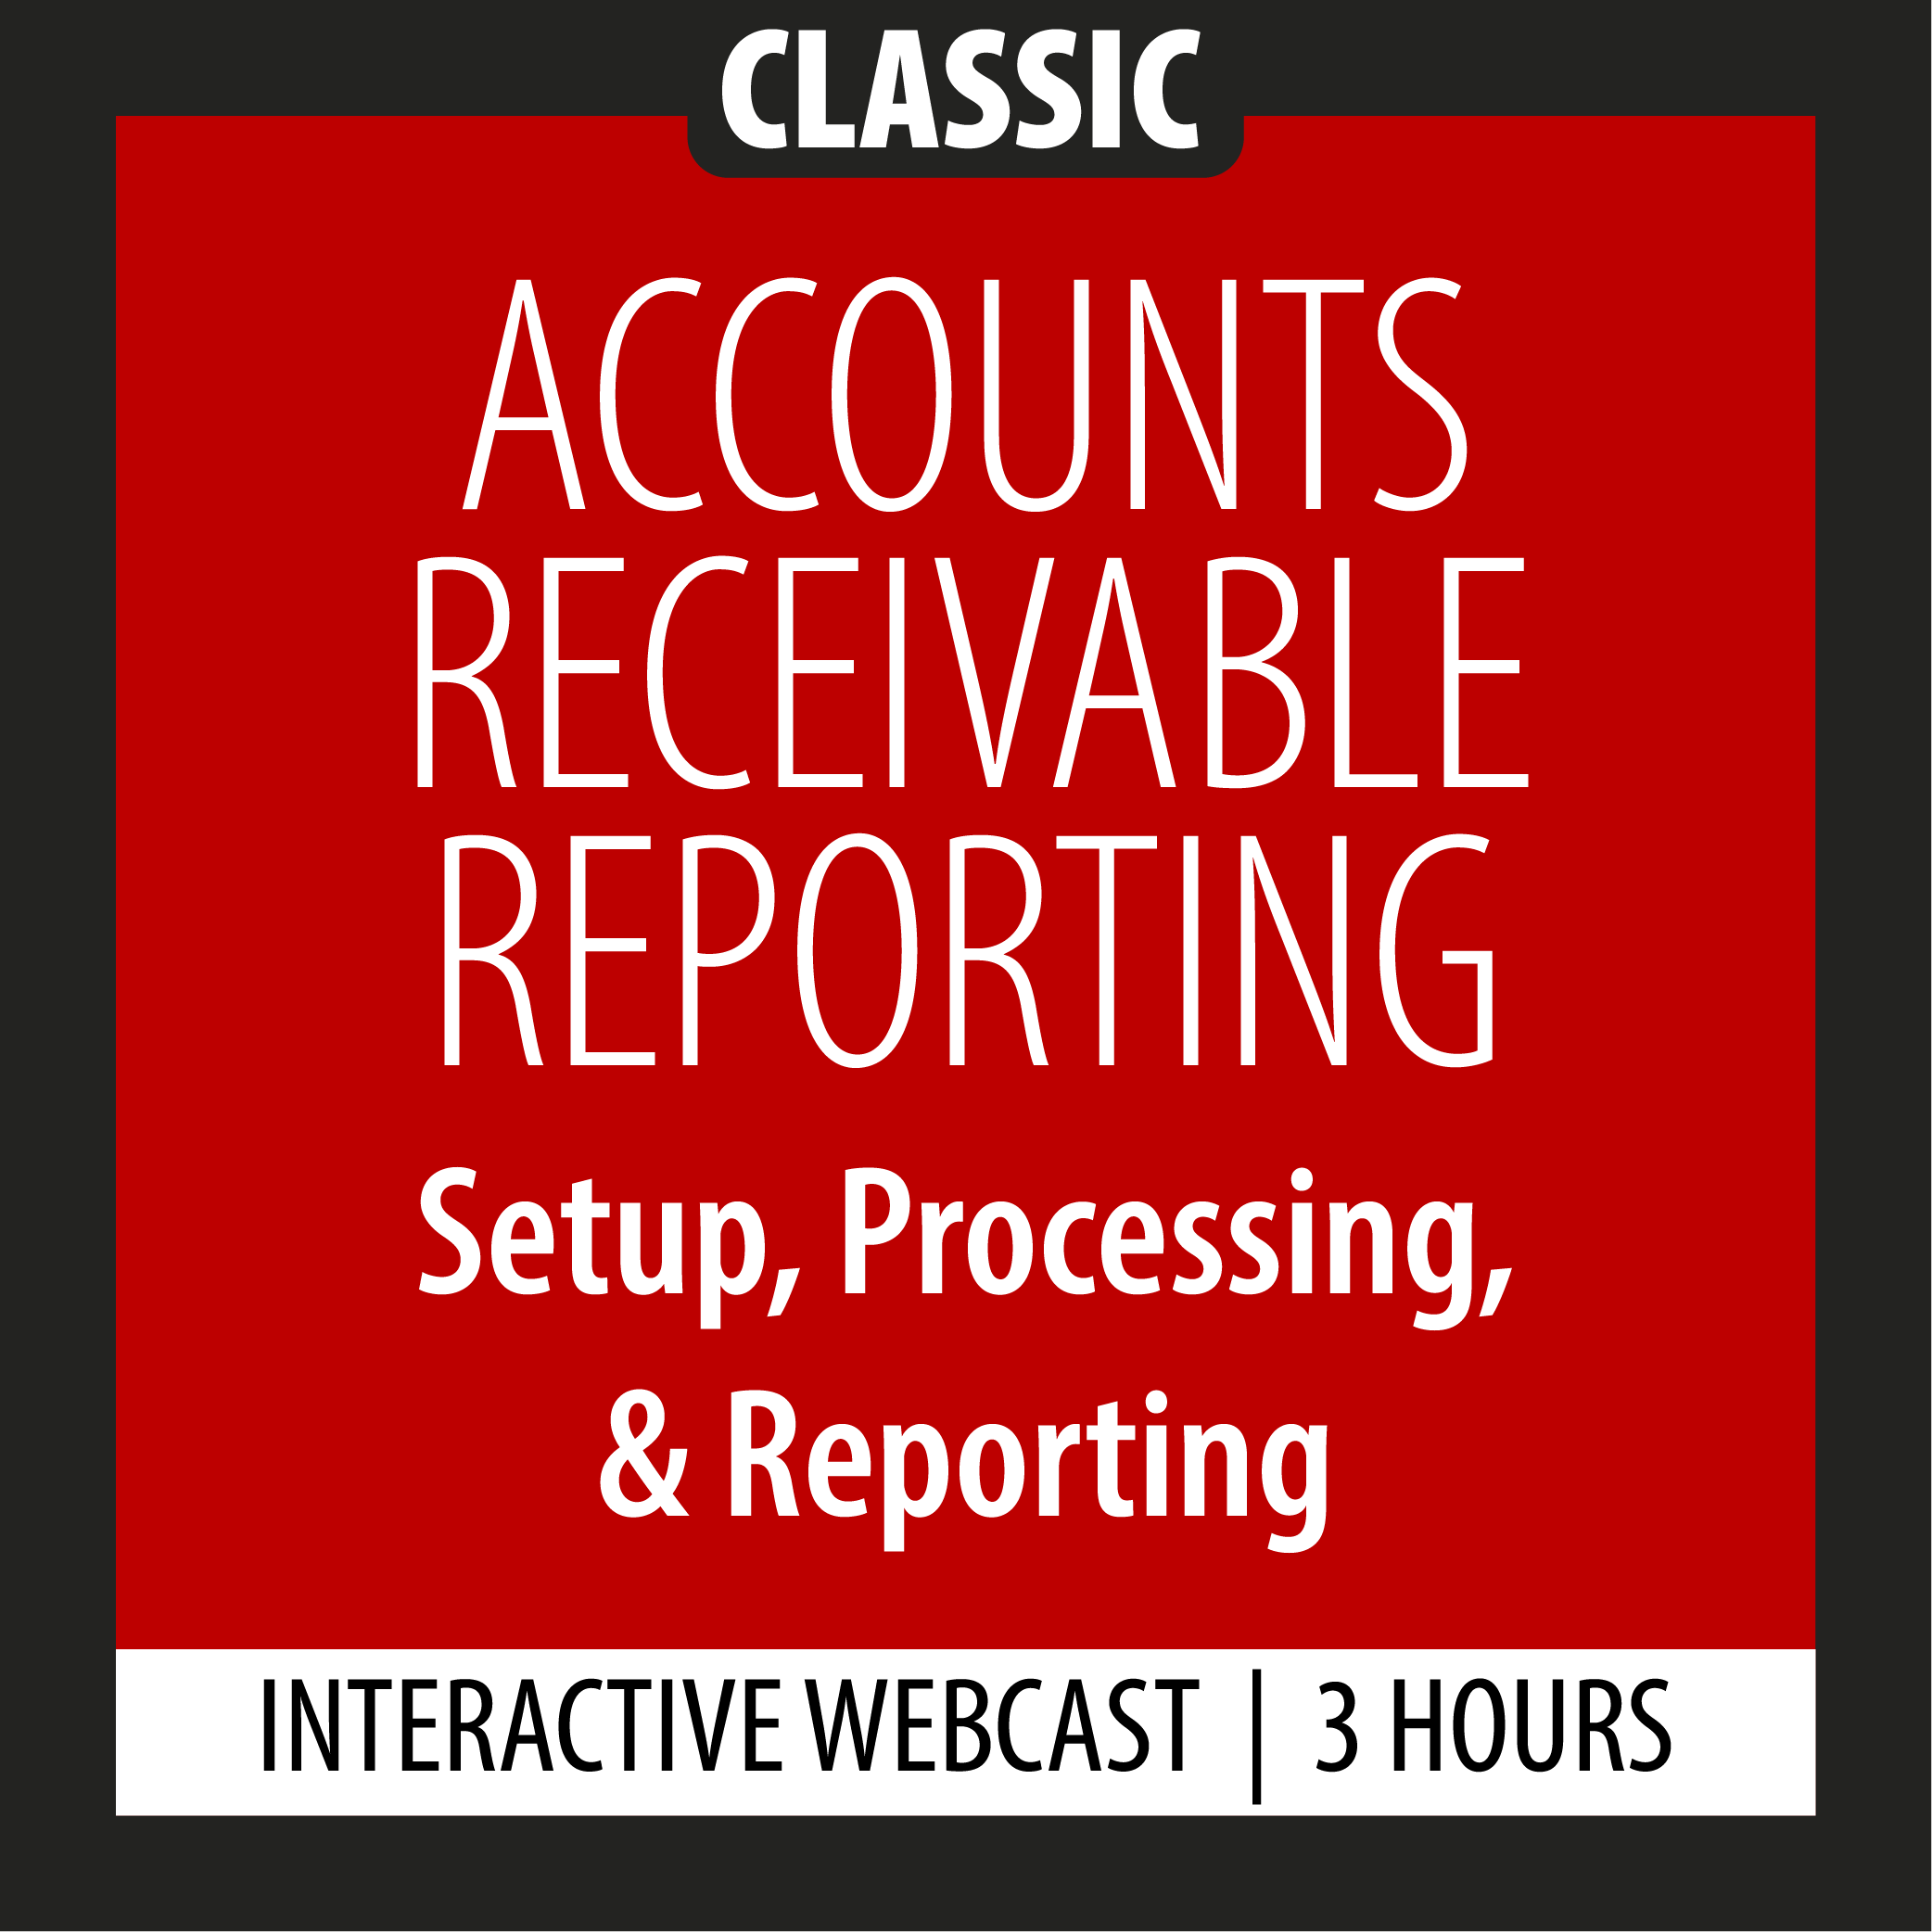 Classic - Accounts Receivable Reporting - Setup, Processing, & Reporting - Webcast - 3 Hours